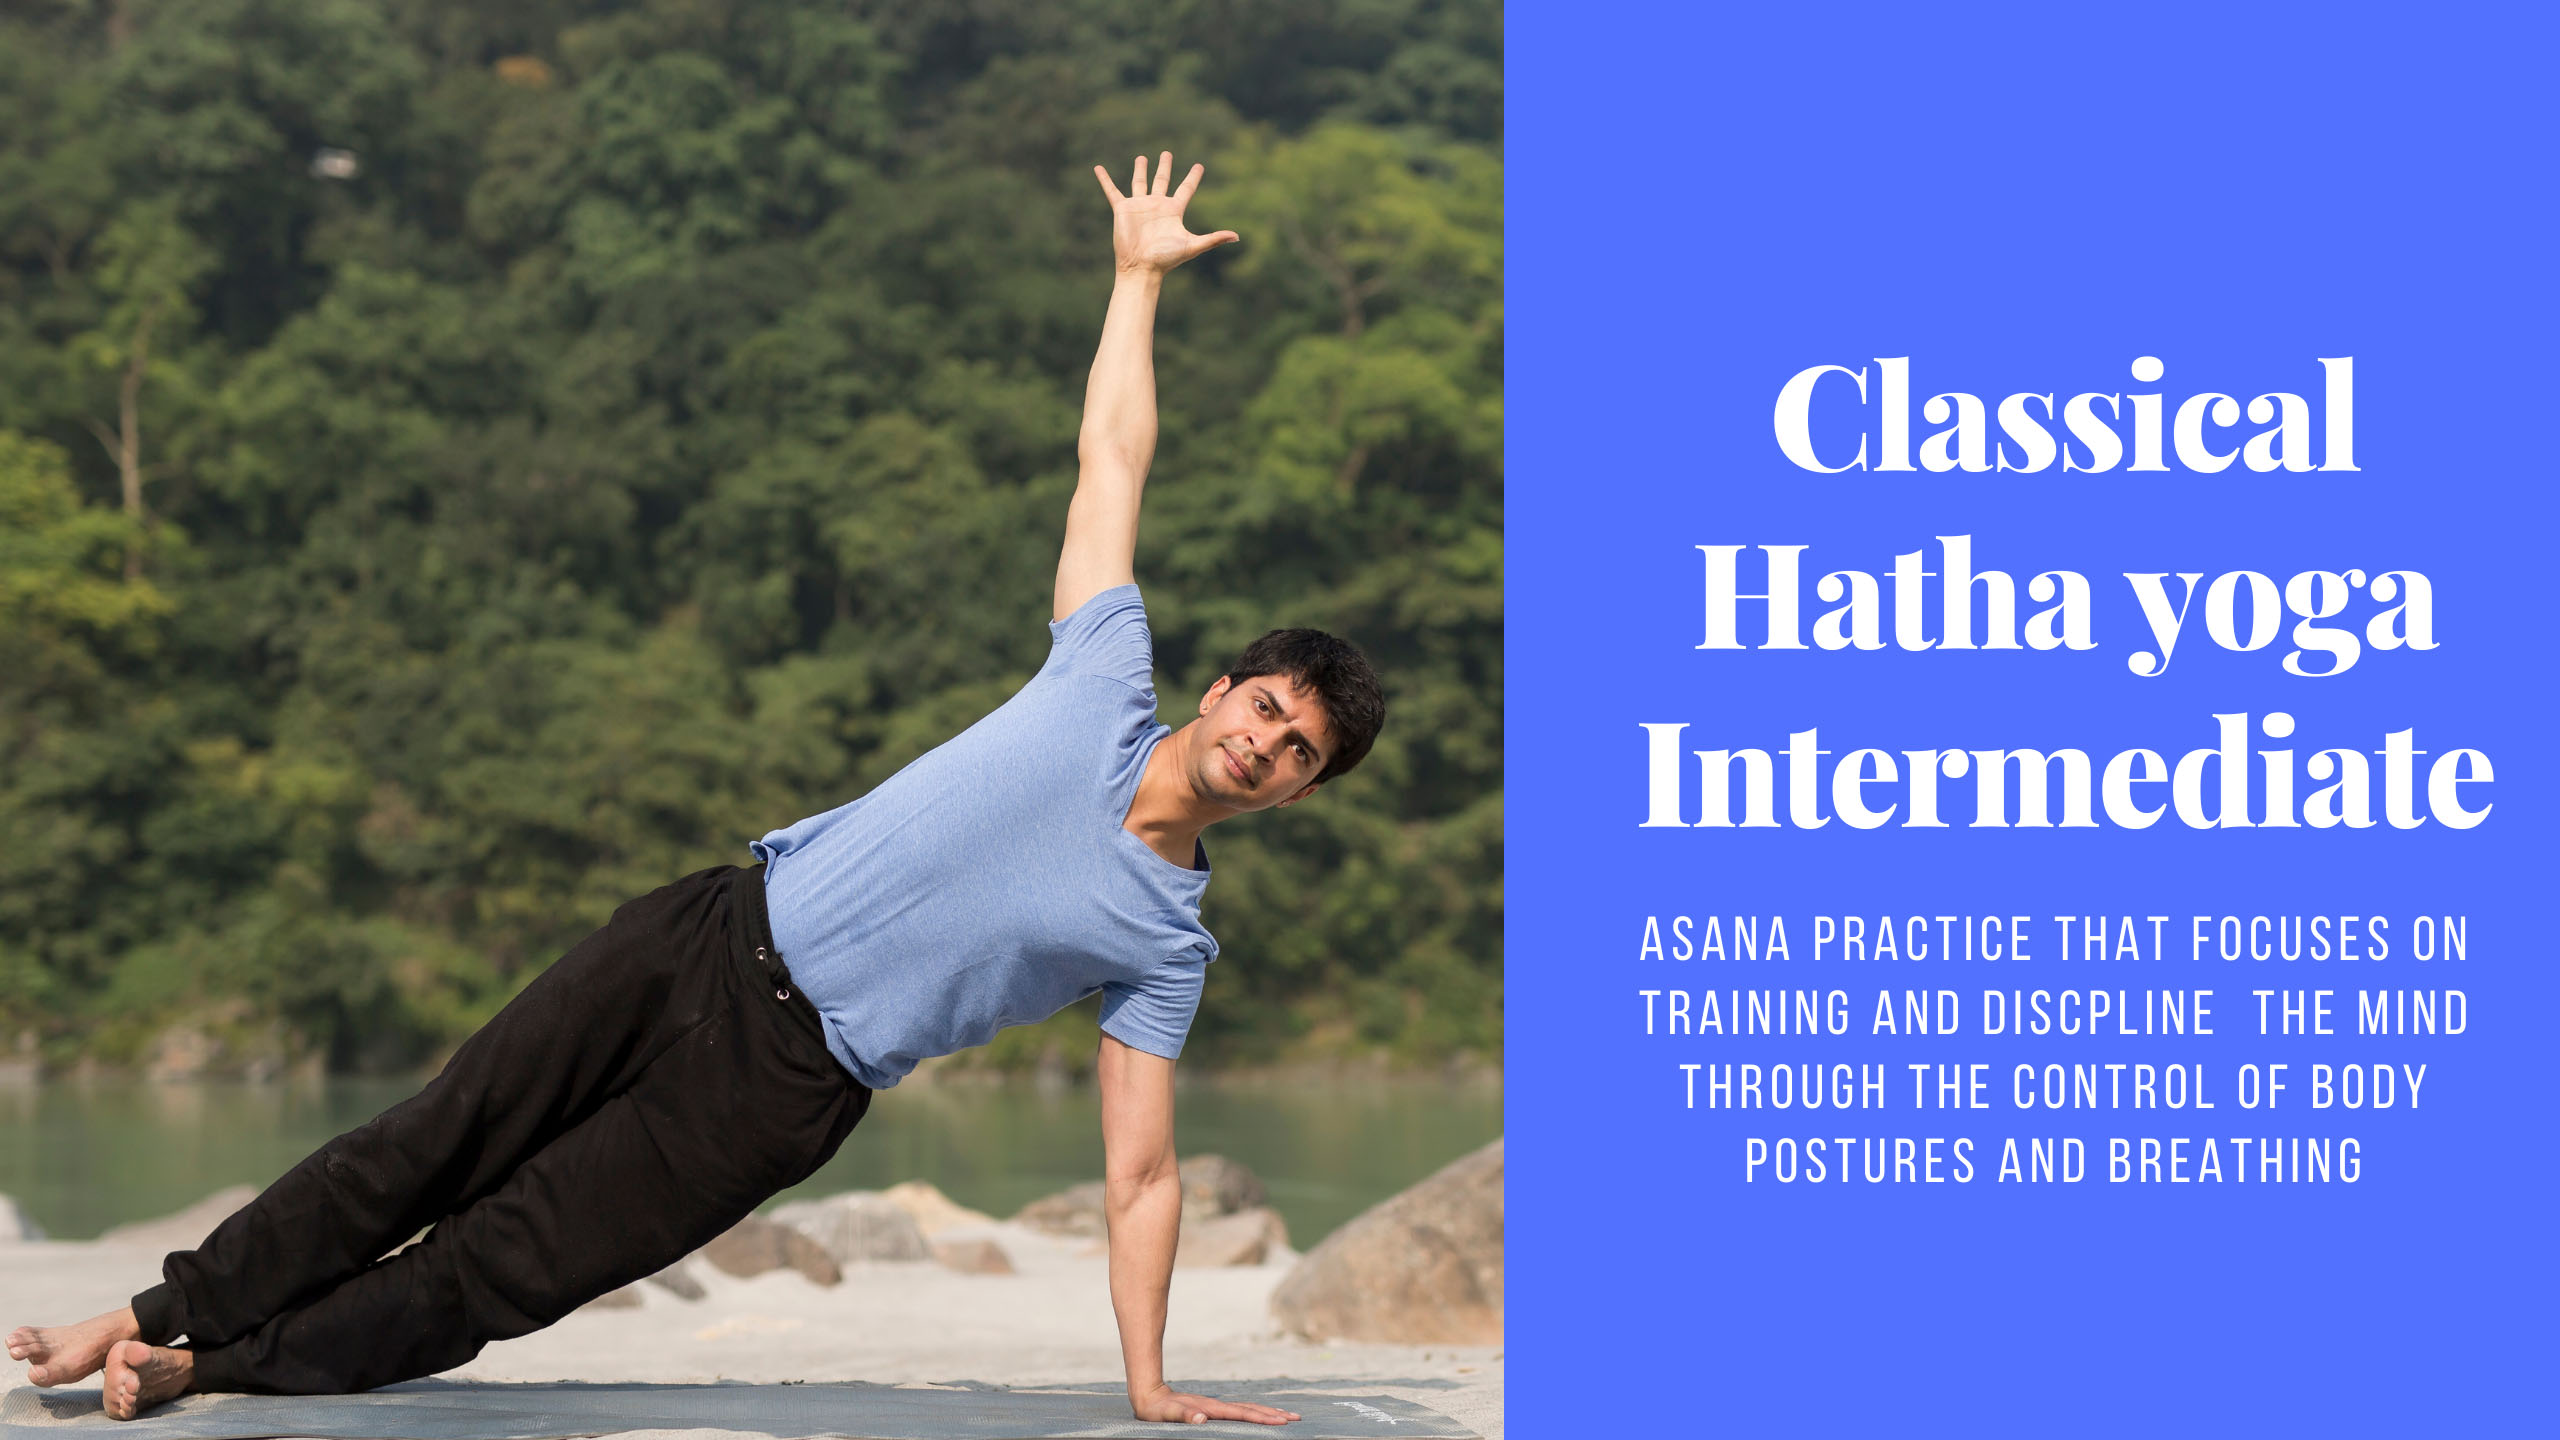 Ekam Yogashala - The Halasana or the plow pose is intermediate level to  advanced level yoga pose and requires practice to gain perfect precision.  While performing this yoga asana, the following muscles